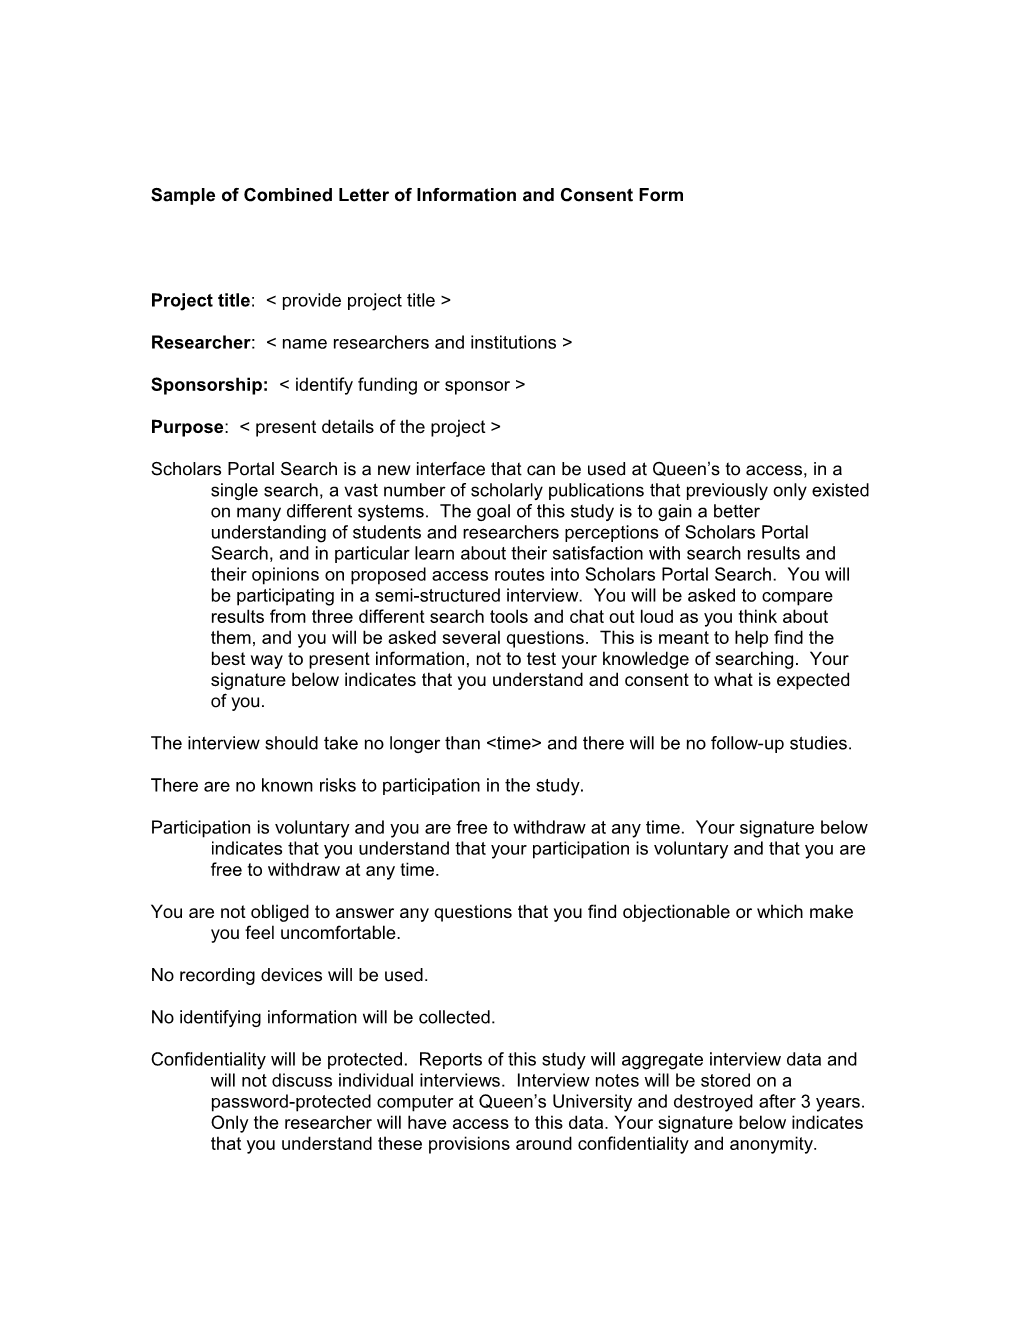 Letter of Information and Consent Form